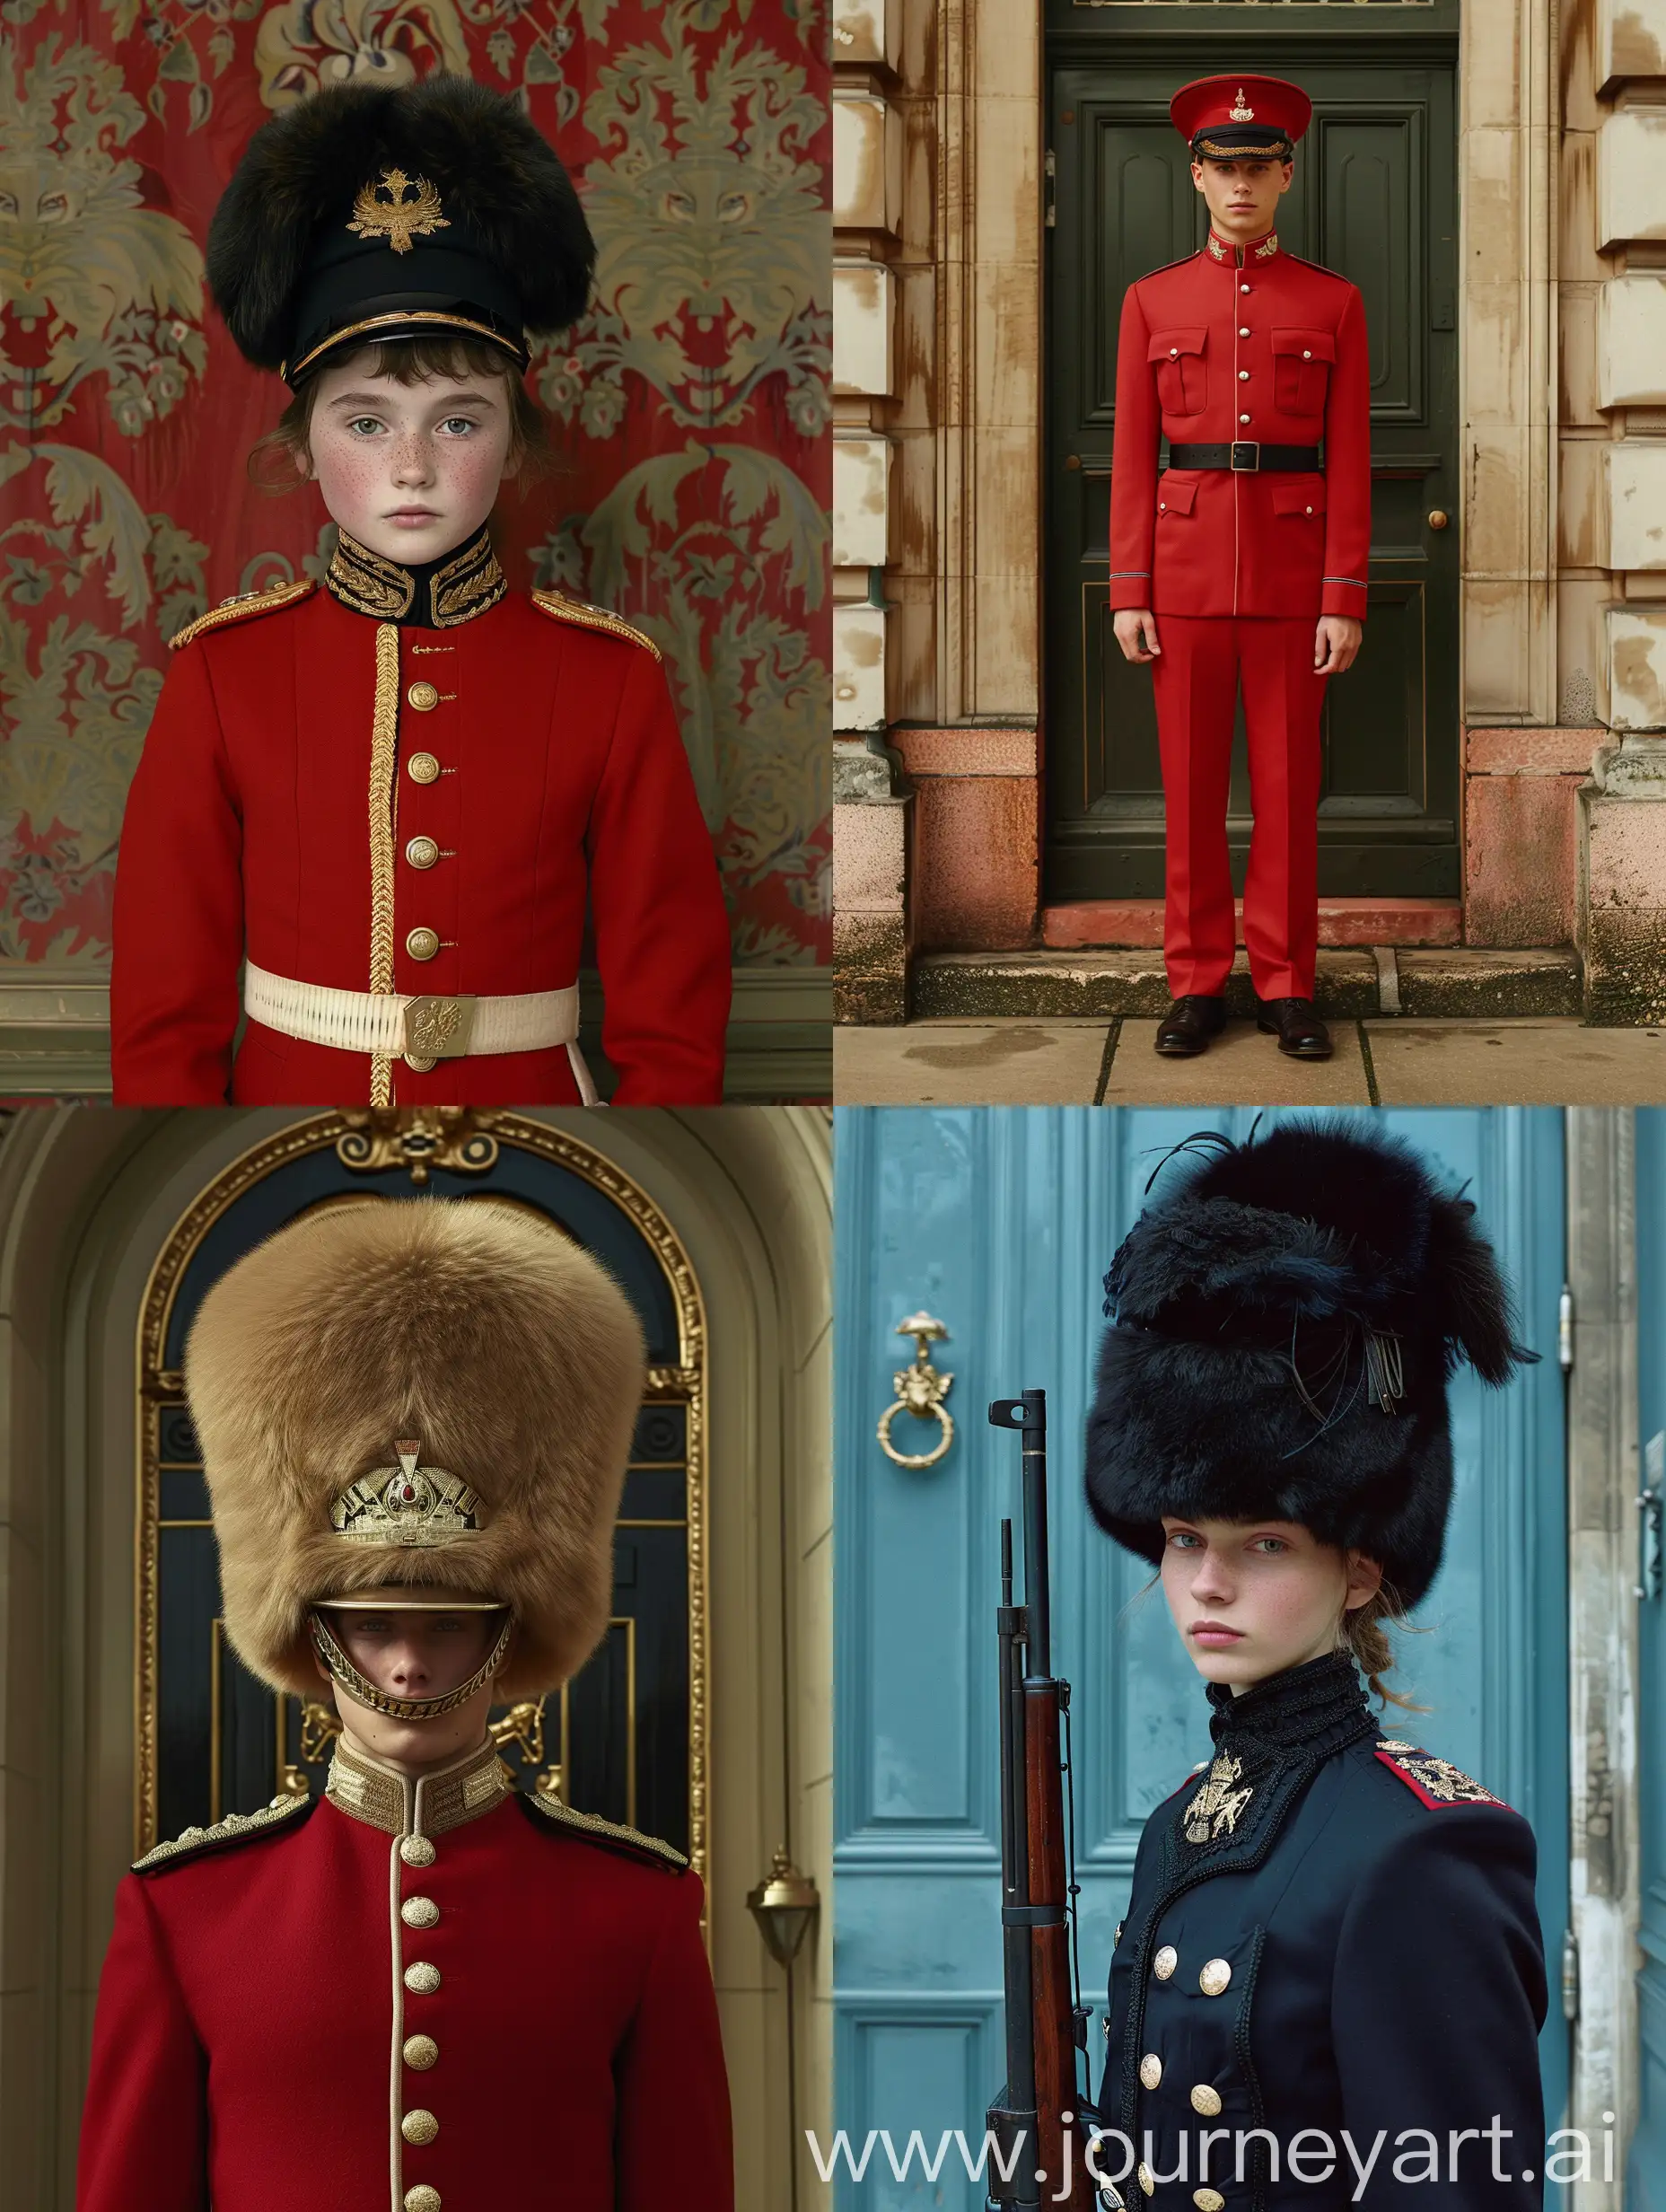 Wes-Anderson-Style-Buckingham-Palace-Guard-Makeover-Cap-Portrait